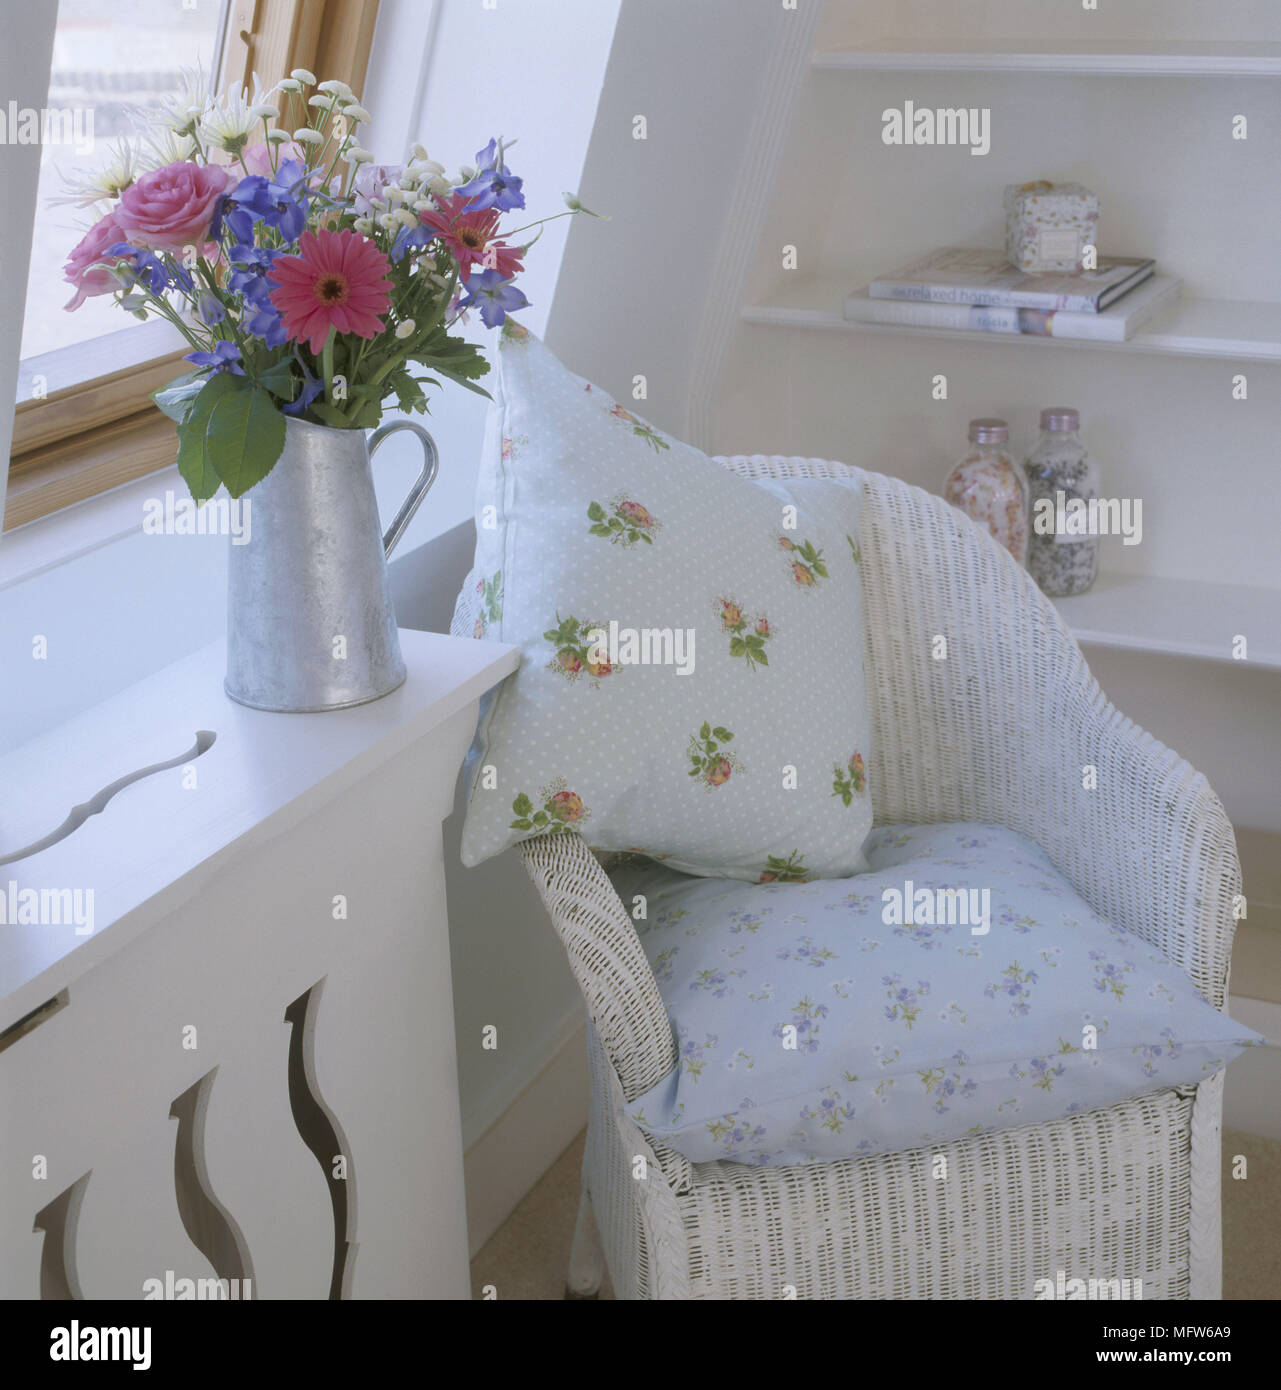 A detail of a country bedroom showing a Lloyd Loom wicker armchair with floral cushions flower arrangement in a galvanised jug Stock Photo